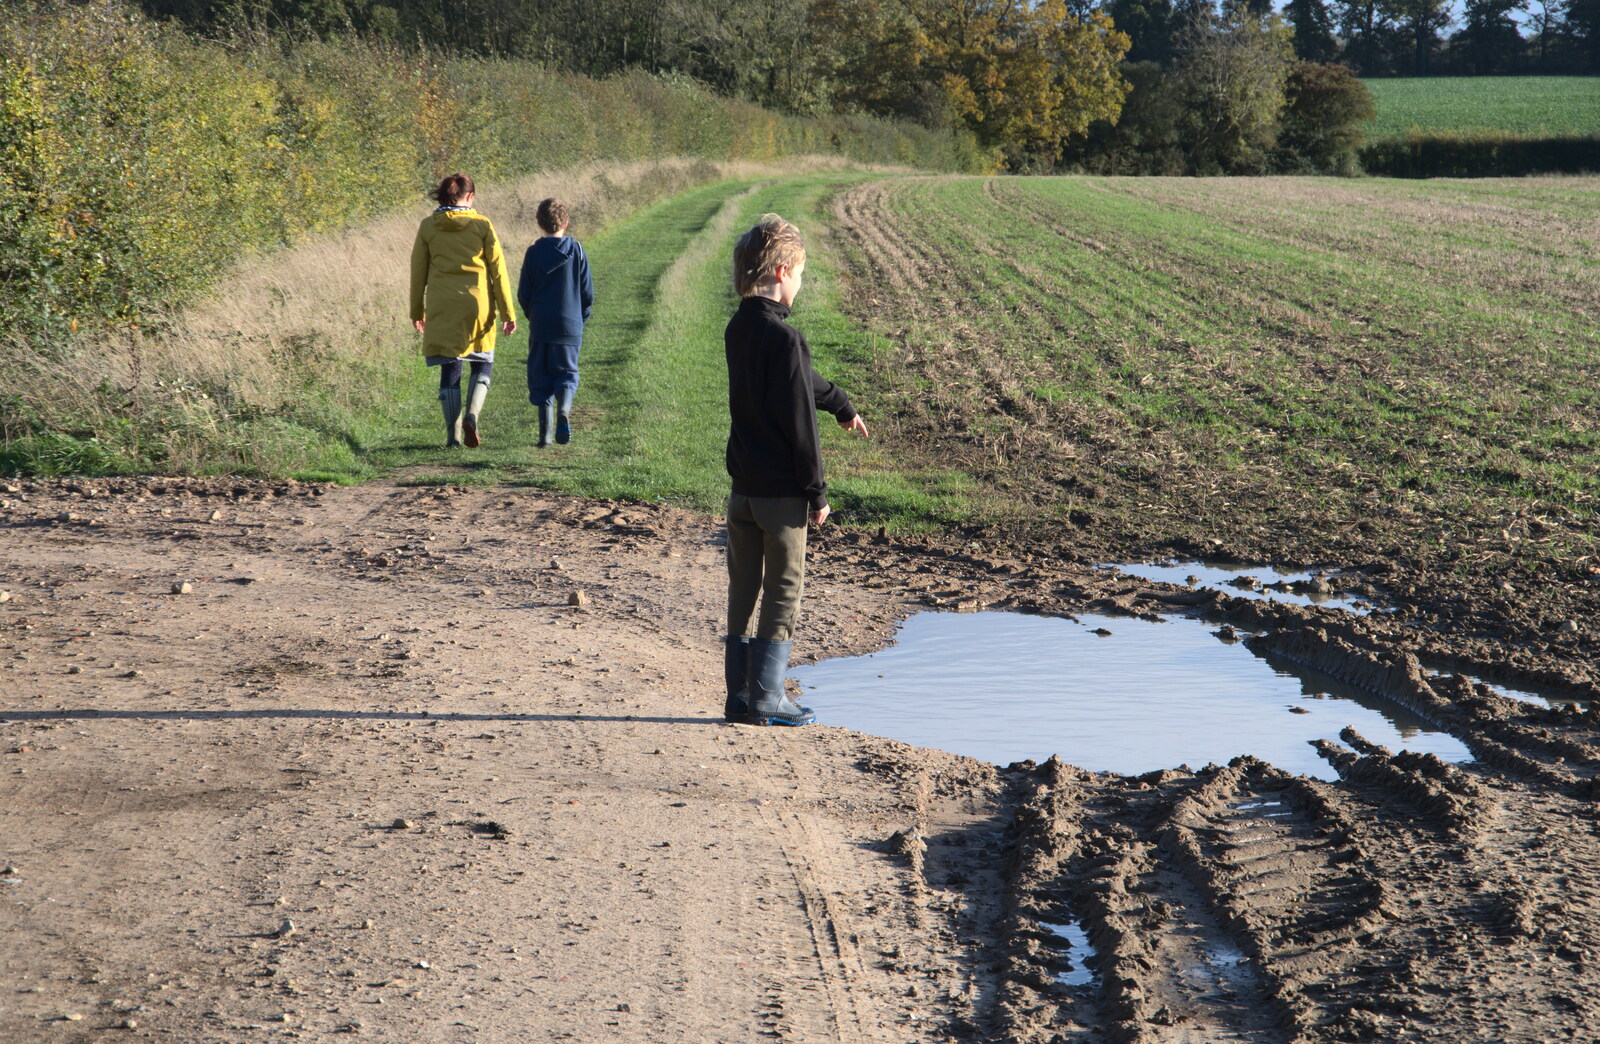 Harry points at a puddle and wonders how deep it is from A Walk Around the Avenue, Brome, Suffolk - 25th October 2020